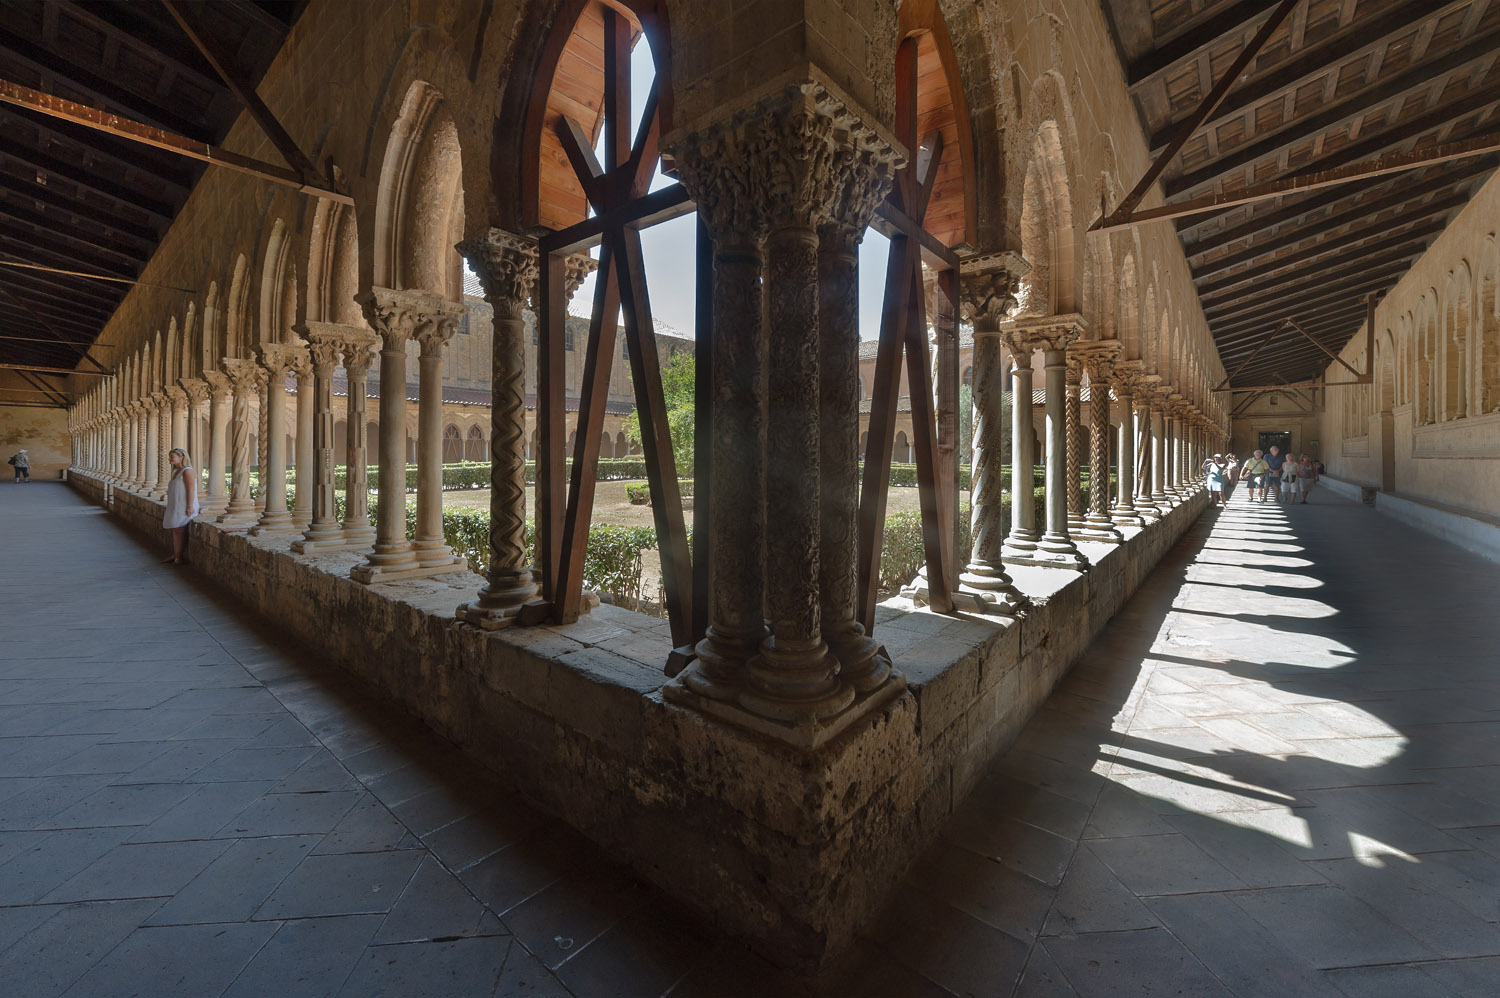 the cloister of the Monreale cathedral, Sicily, Italy